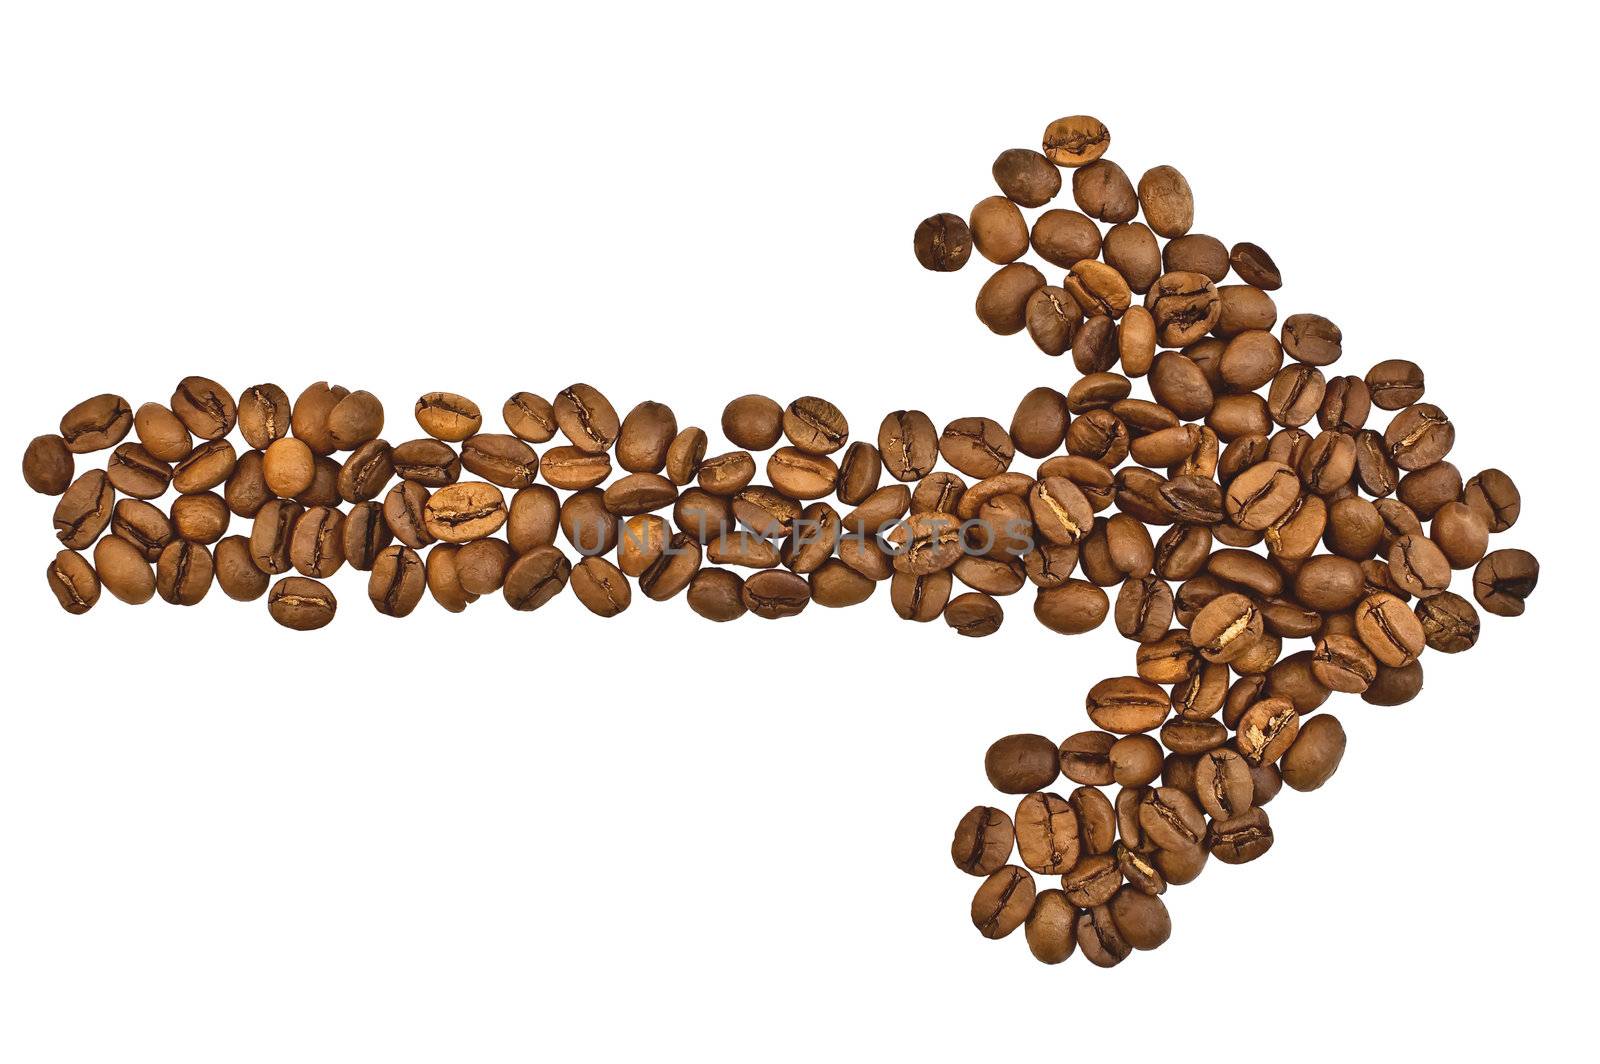 Coffee beans in the form of arrows by rezkrr